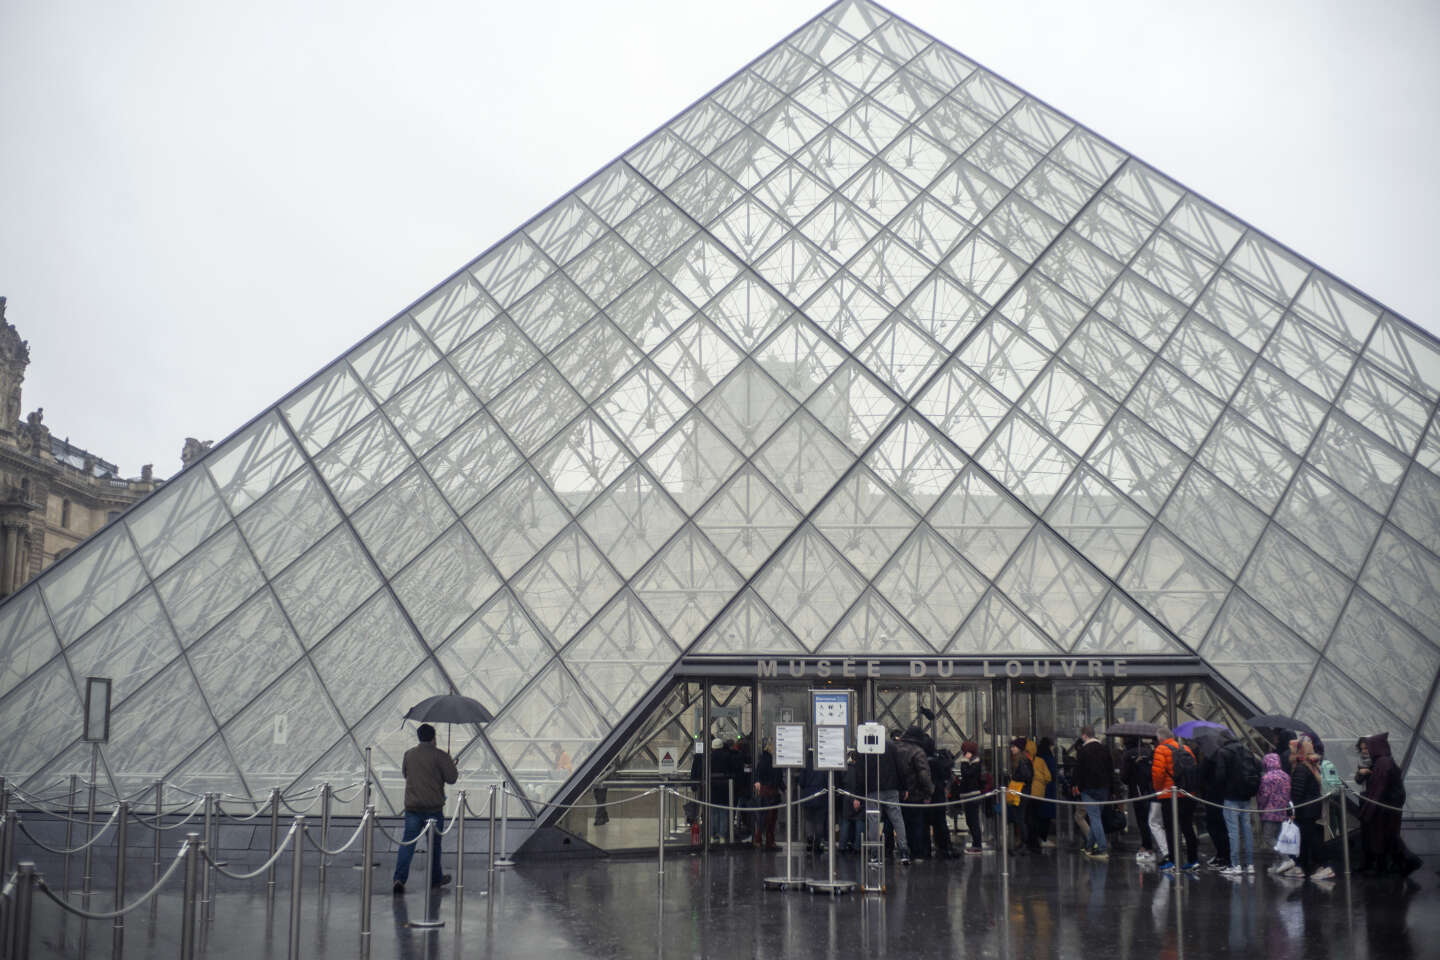 “Do tourists from abroad have to pay more for their entrance ticket to a museum than people residing in France?  »